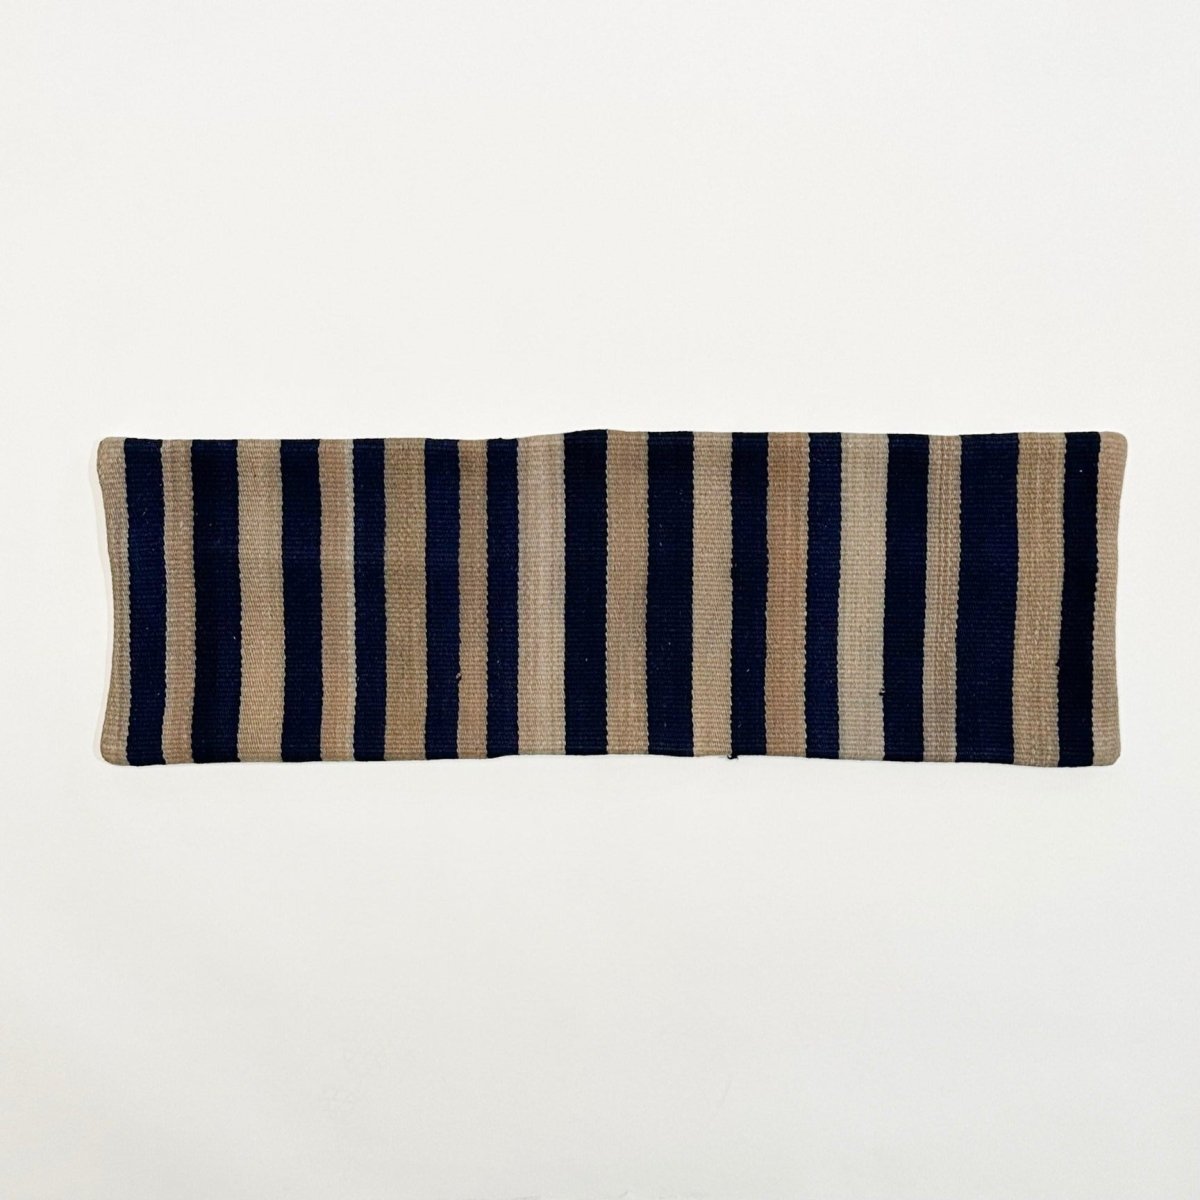 Navy & Beige Striped Lumbar Pillow Cover (12"x36") - SpaceHavenHome